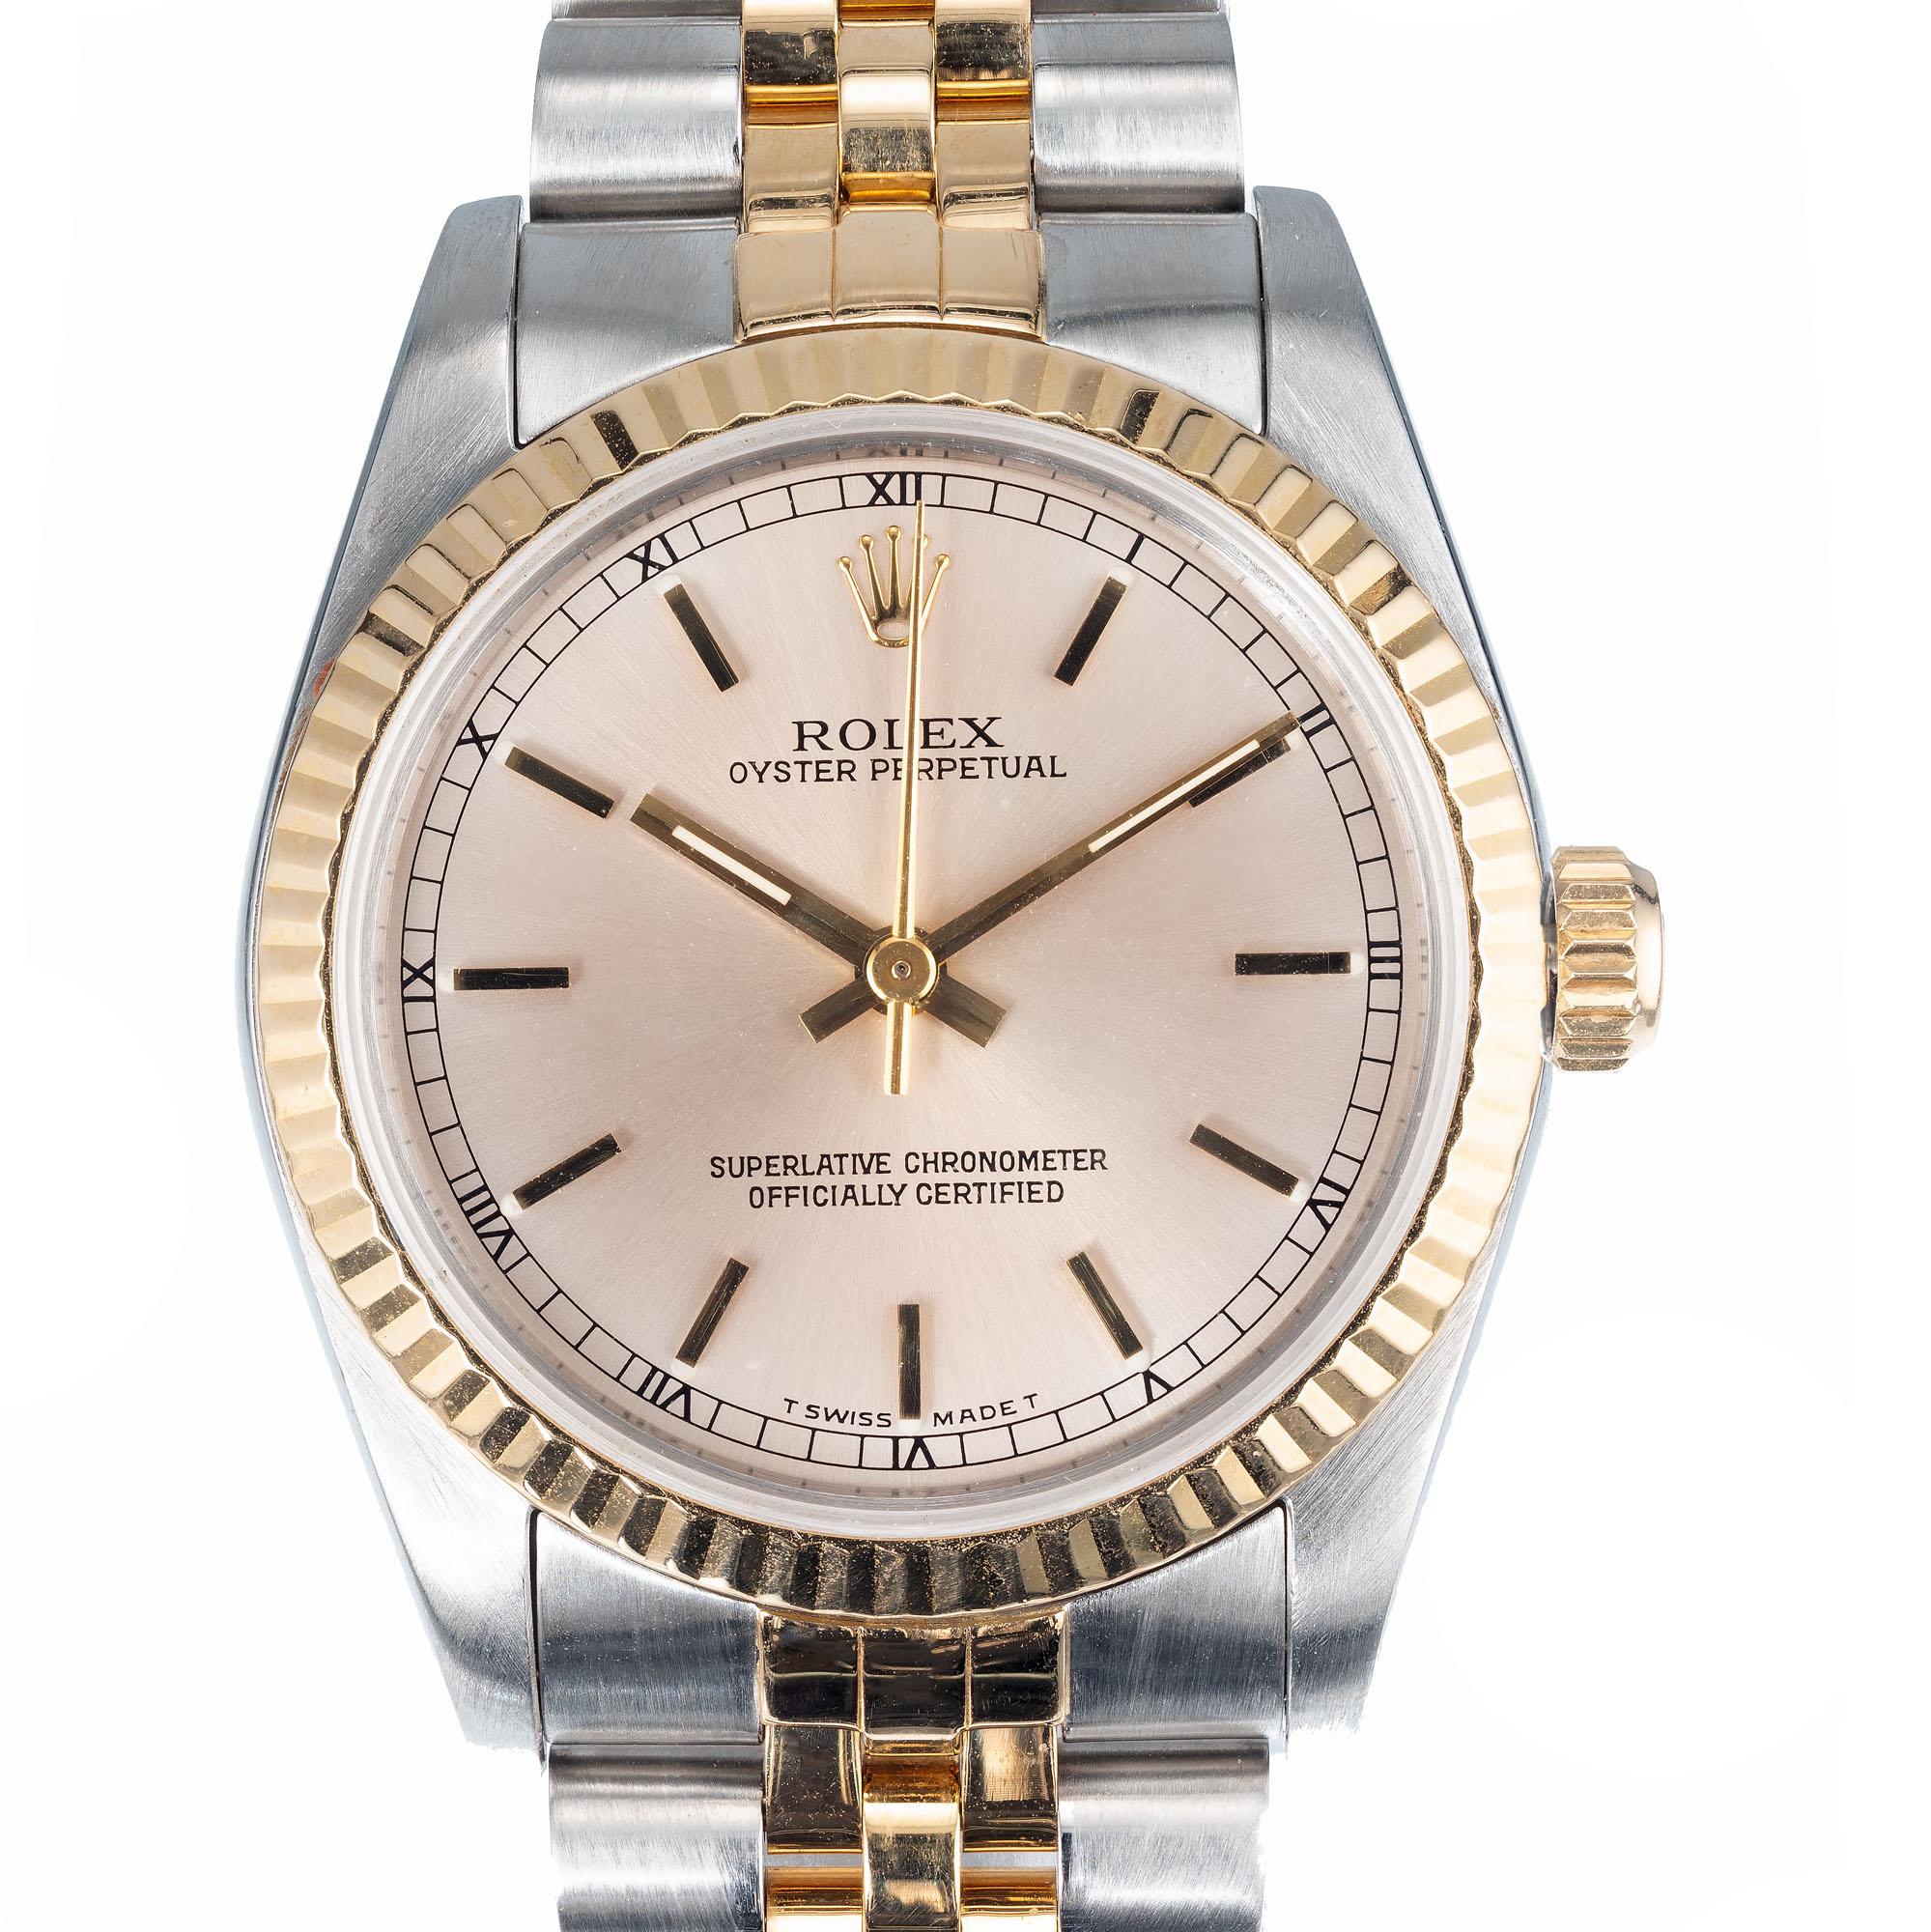 1992 Rolex midsize 67513 oyster perpetual champagne dial date in 18k yellow gold and steel. Jubilee Rolex band. All factory original  

Length: 37.11mm
Width: 30mm
Band width at case: 17mm
Case thickness: 10.37mm
Band: Two tone jubilee
Crystal: